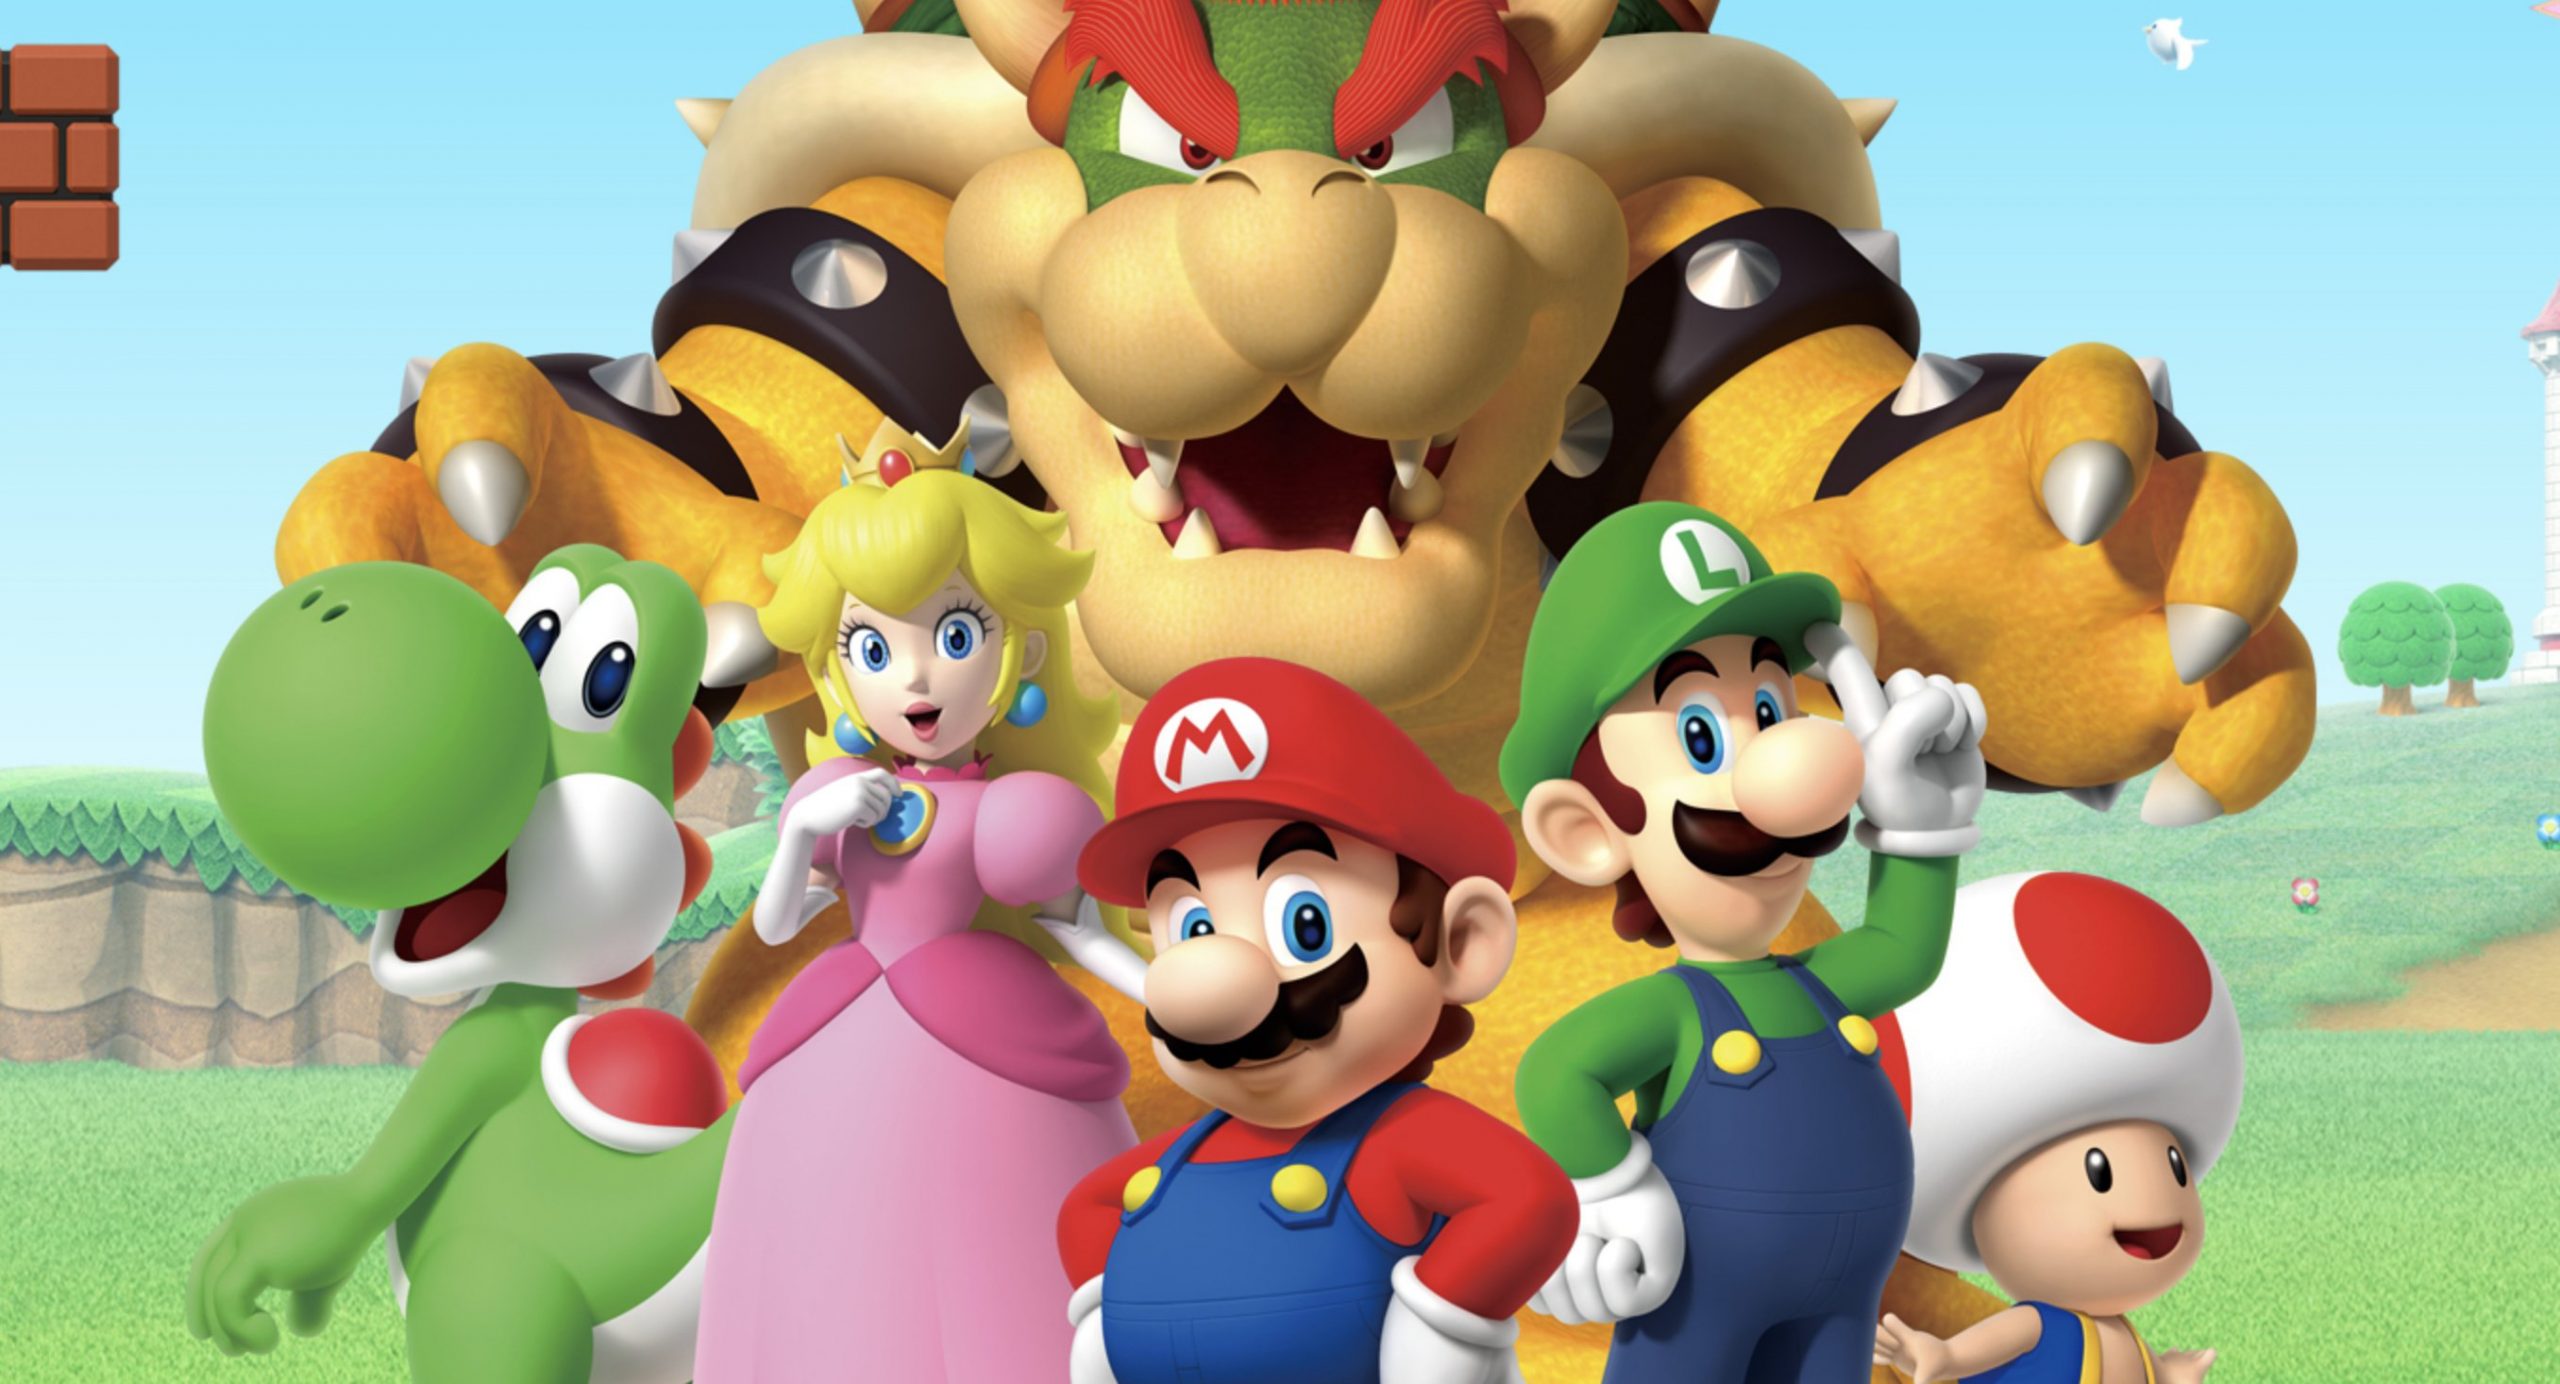 Super Mario Movie: All Actors Confirmed and Who They Play